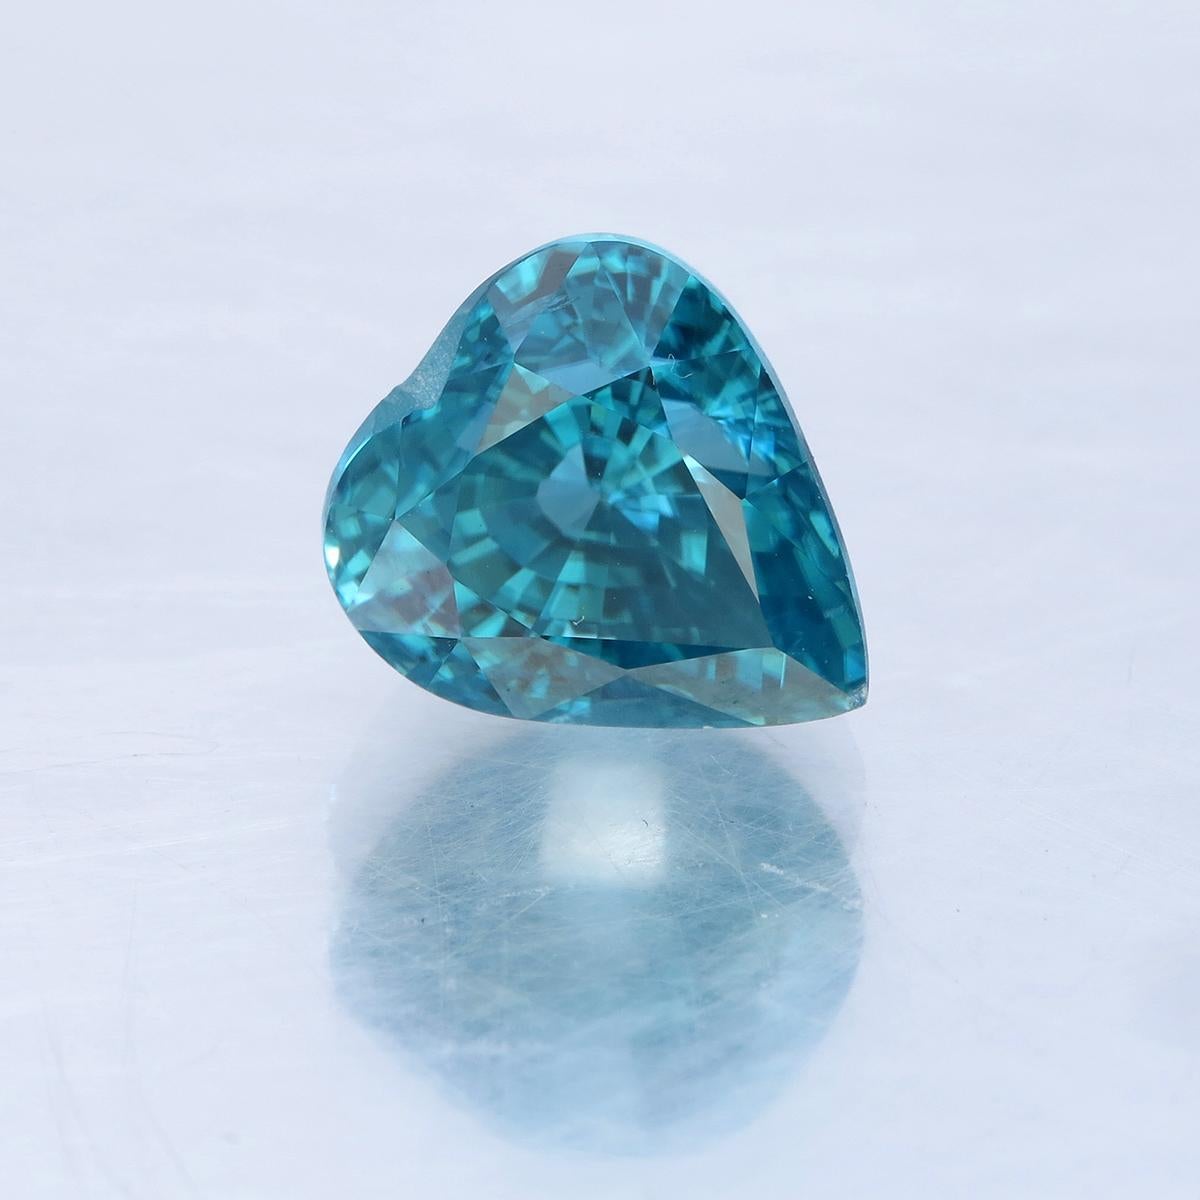 Natural Ocean Blue Zircon

Rare sparkling Blue Zircon is only found at one place in the world at Ratanakiri province in Northeast Cambodia. Blue Zircon in this vivid blue color is very rare indeed. We cherry pick the stones at the mine in Cambodia